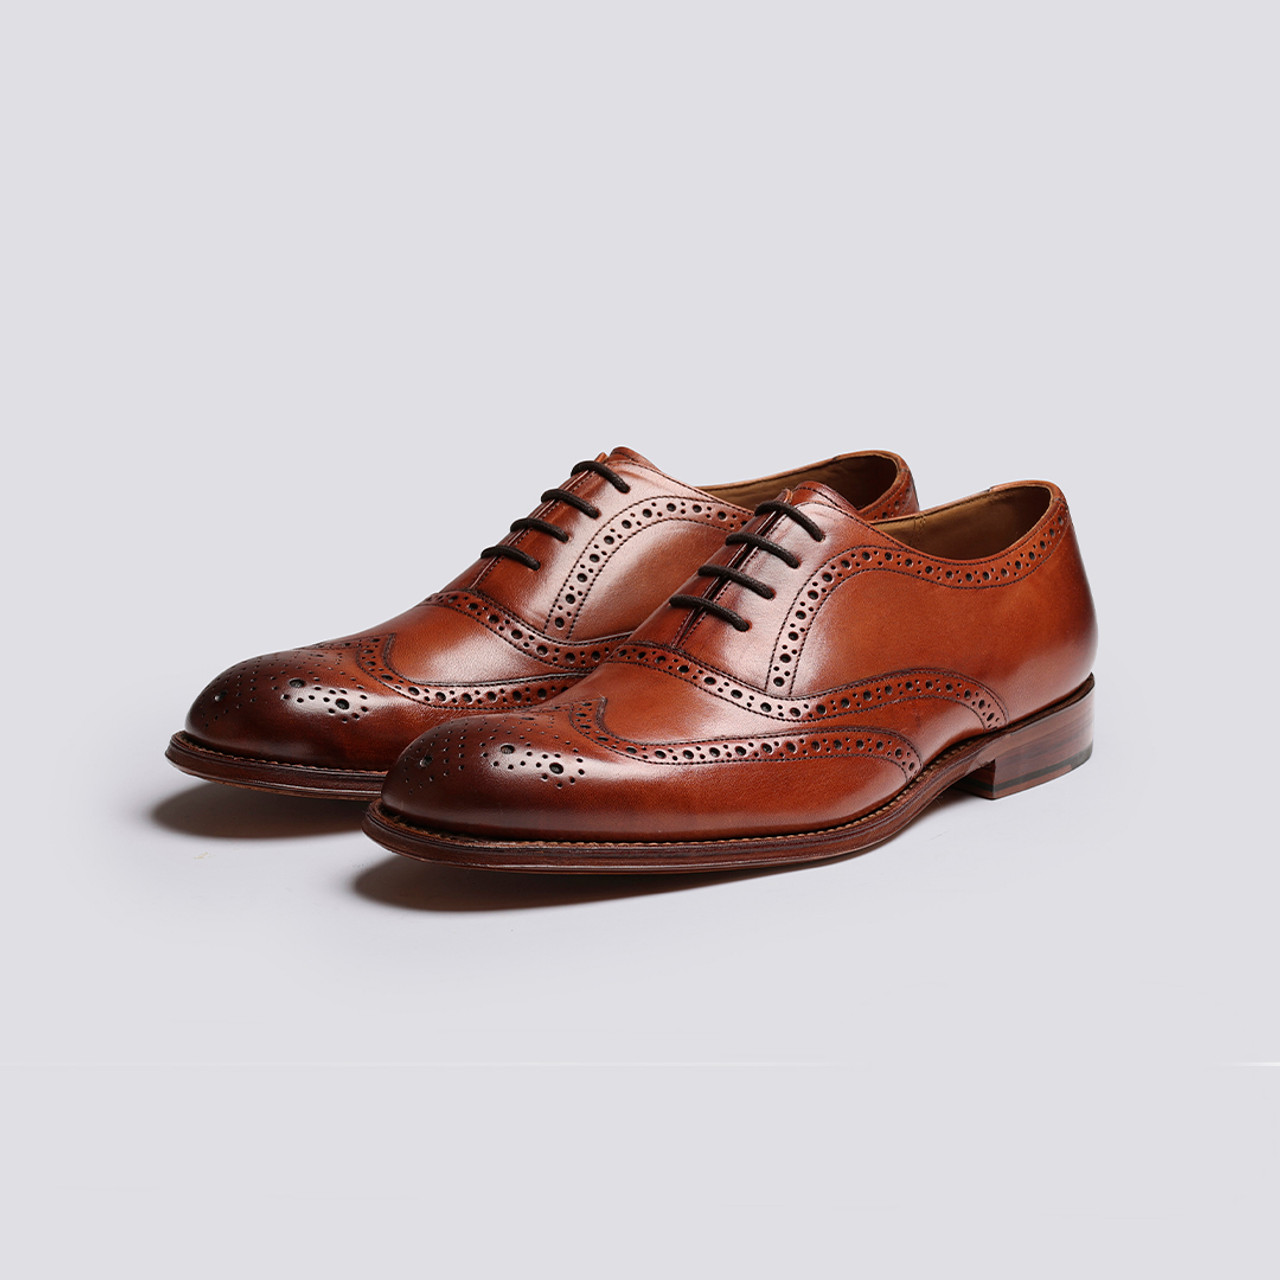 Luther | Mens Brogues with Wingtip in Tan Leather | Grenson